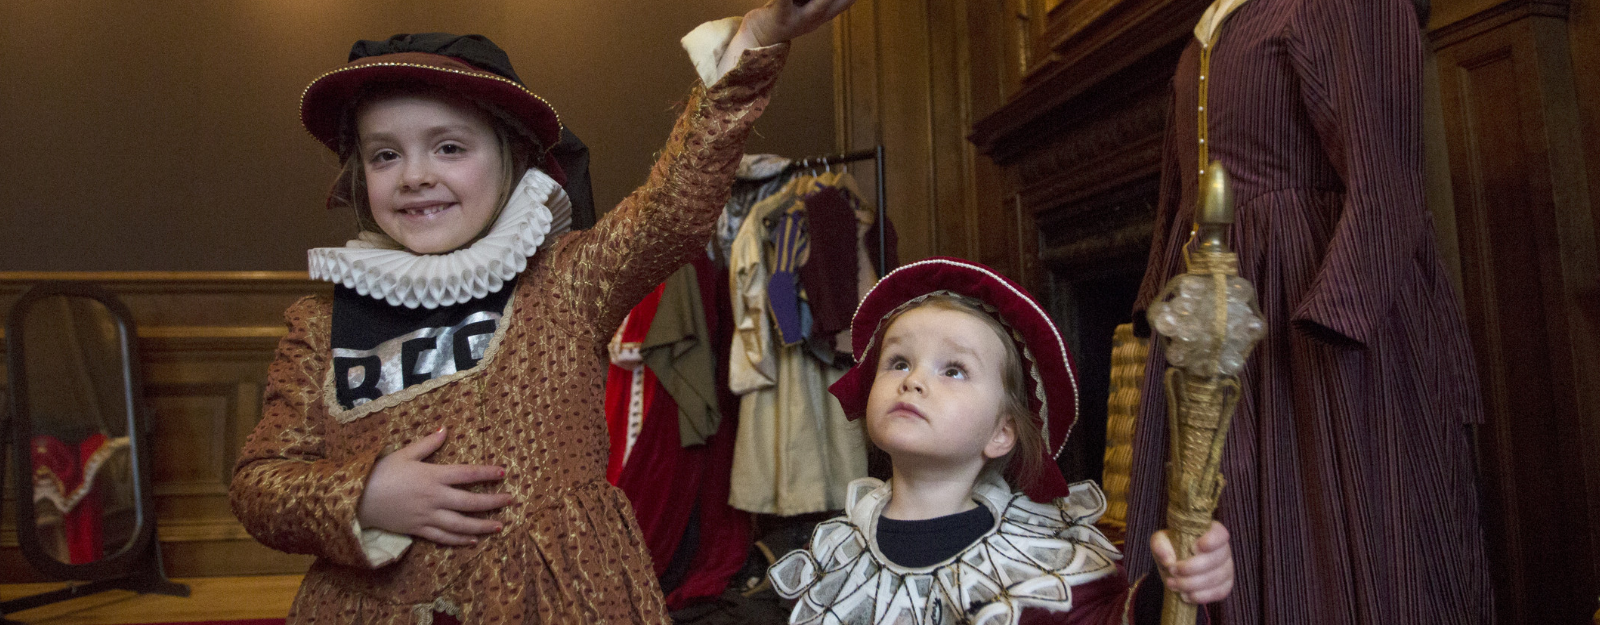 Two children dressing up in historical costumes